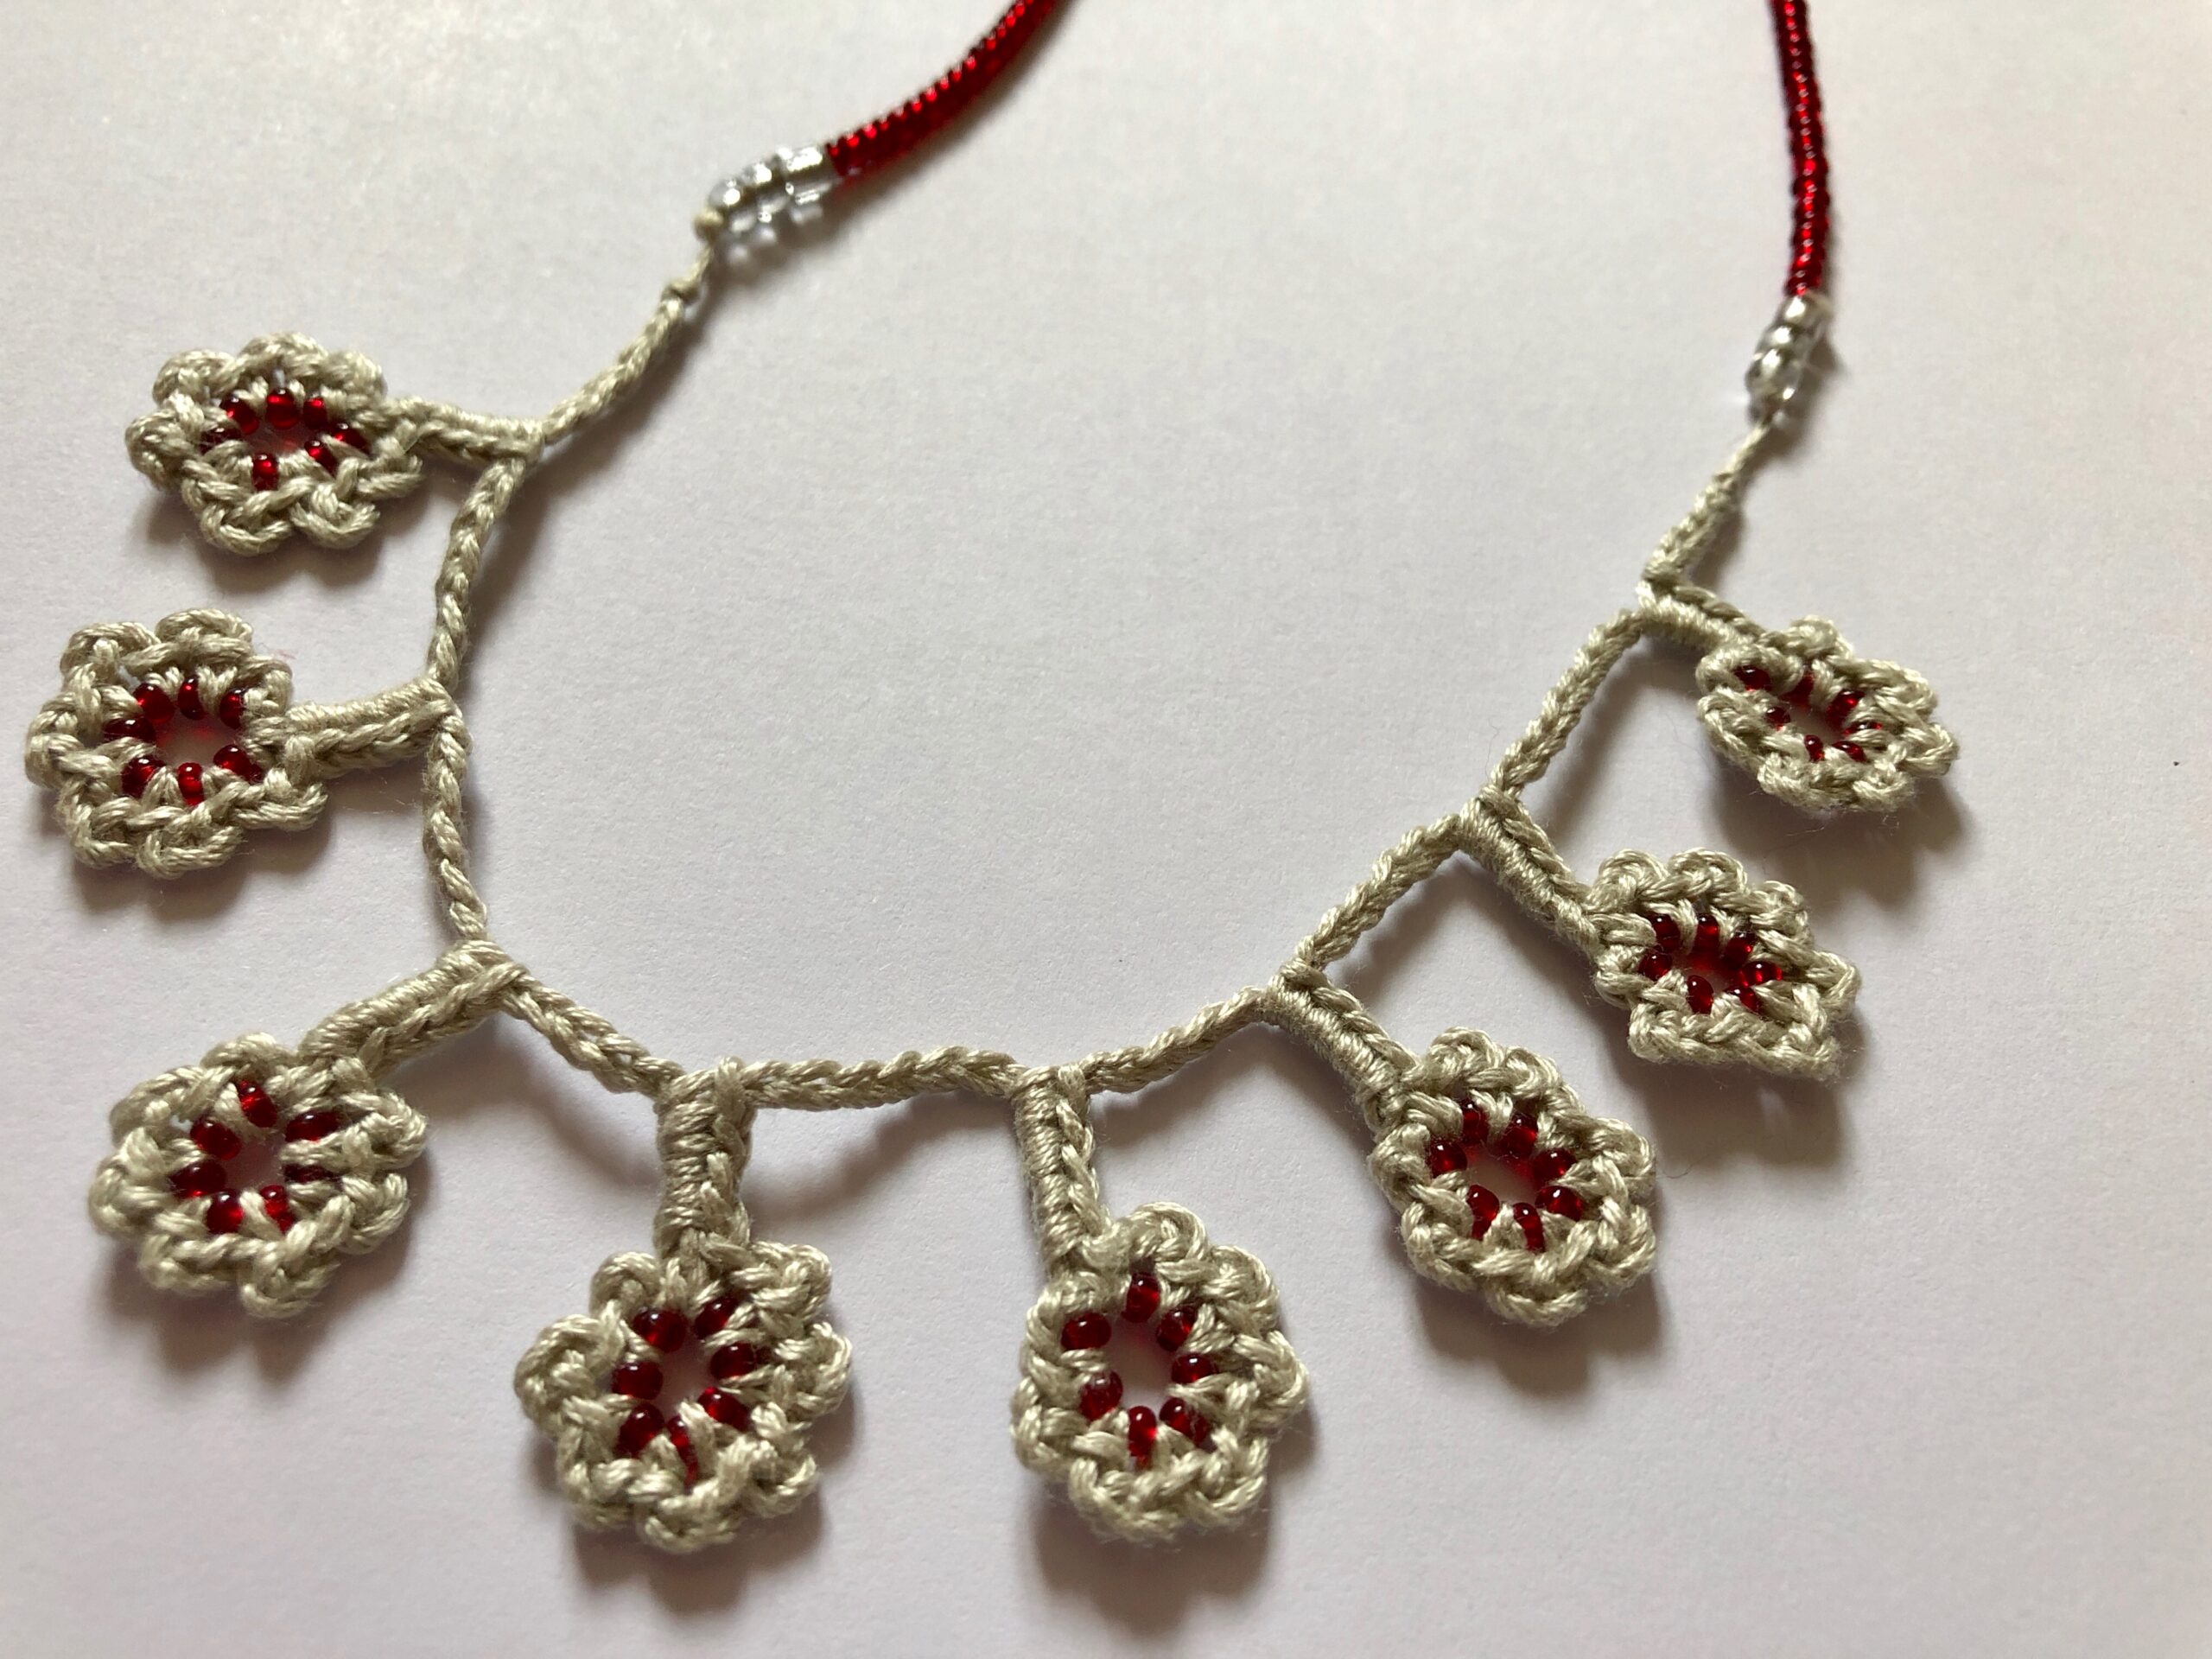 Crocheted and beaded flower necklace.